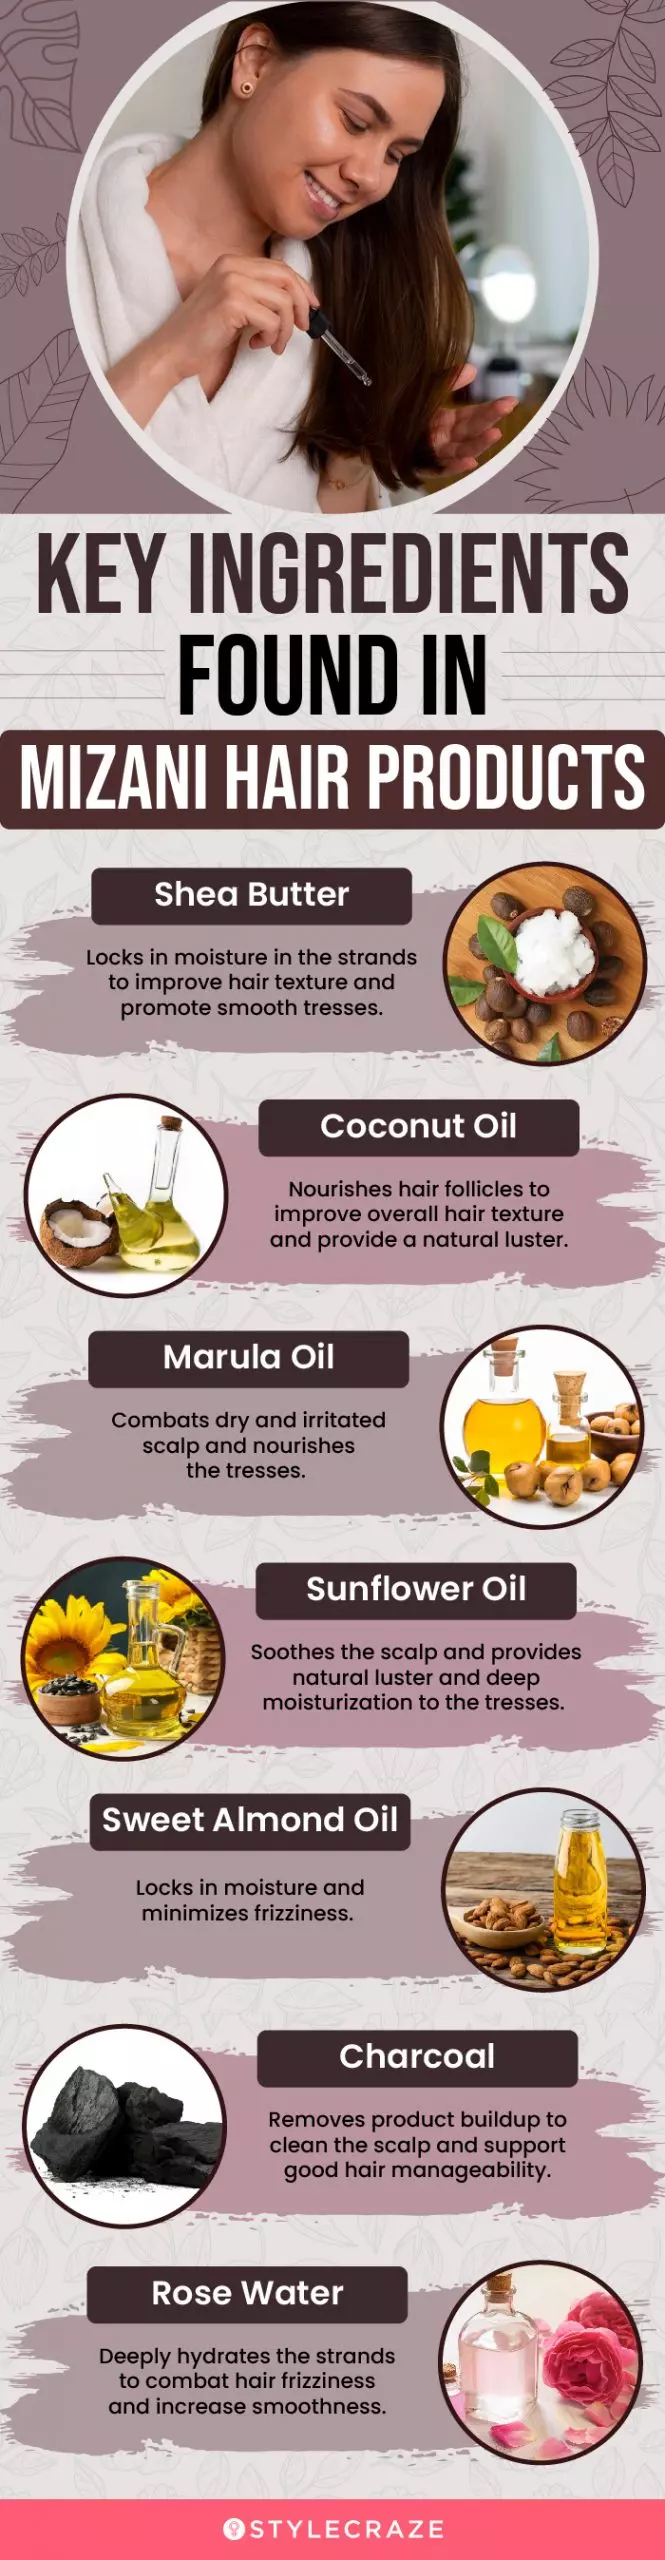 Key Ingredients Found In Mizani Hair Products (infographic)